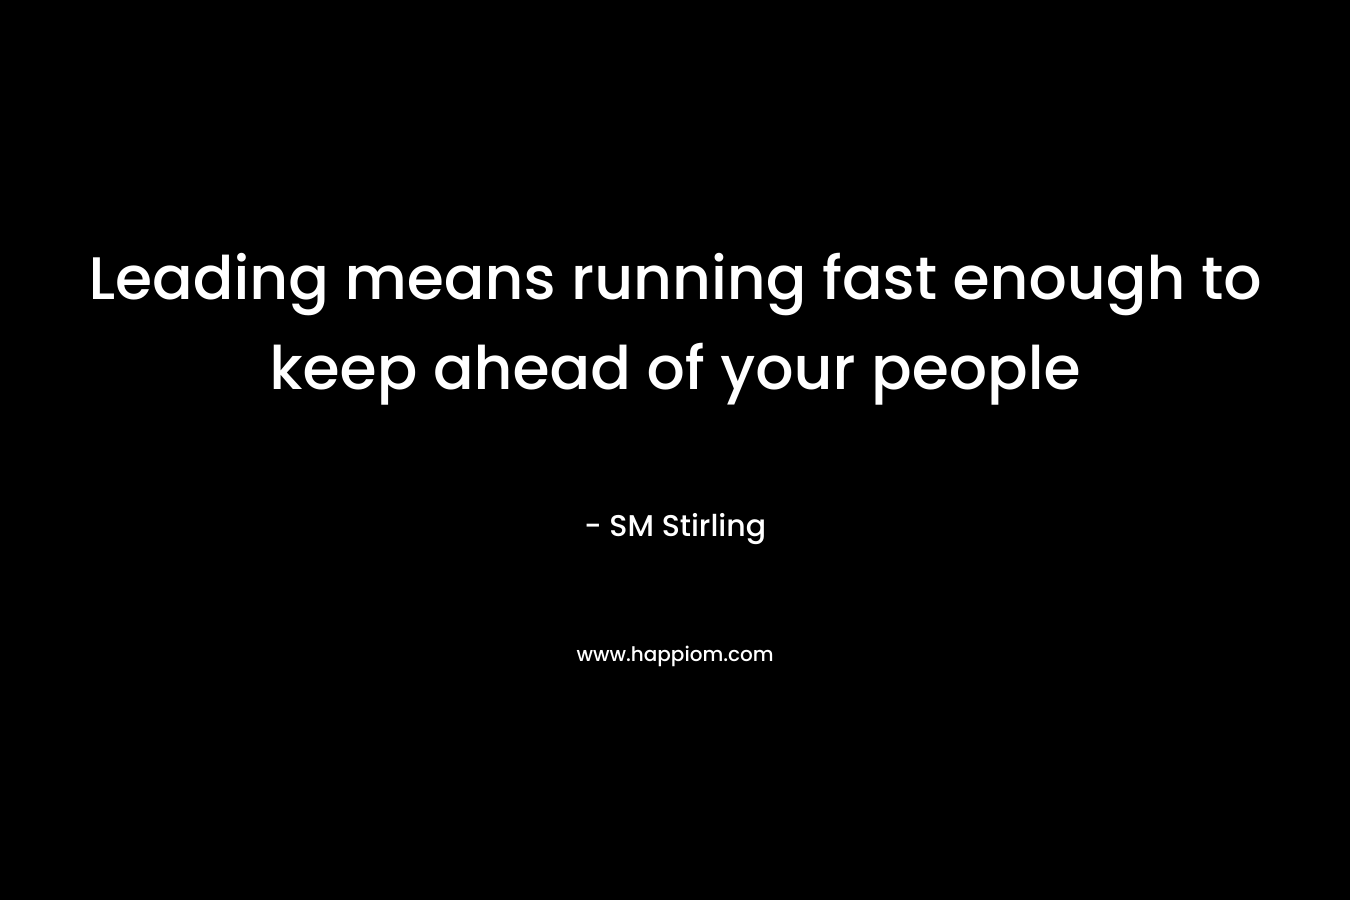 Leading means running fast enough to keep ahead of your people